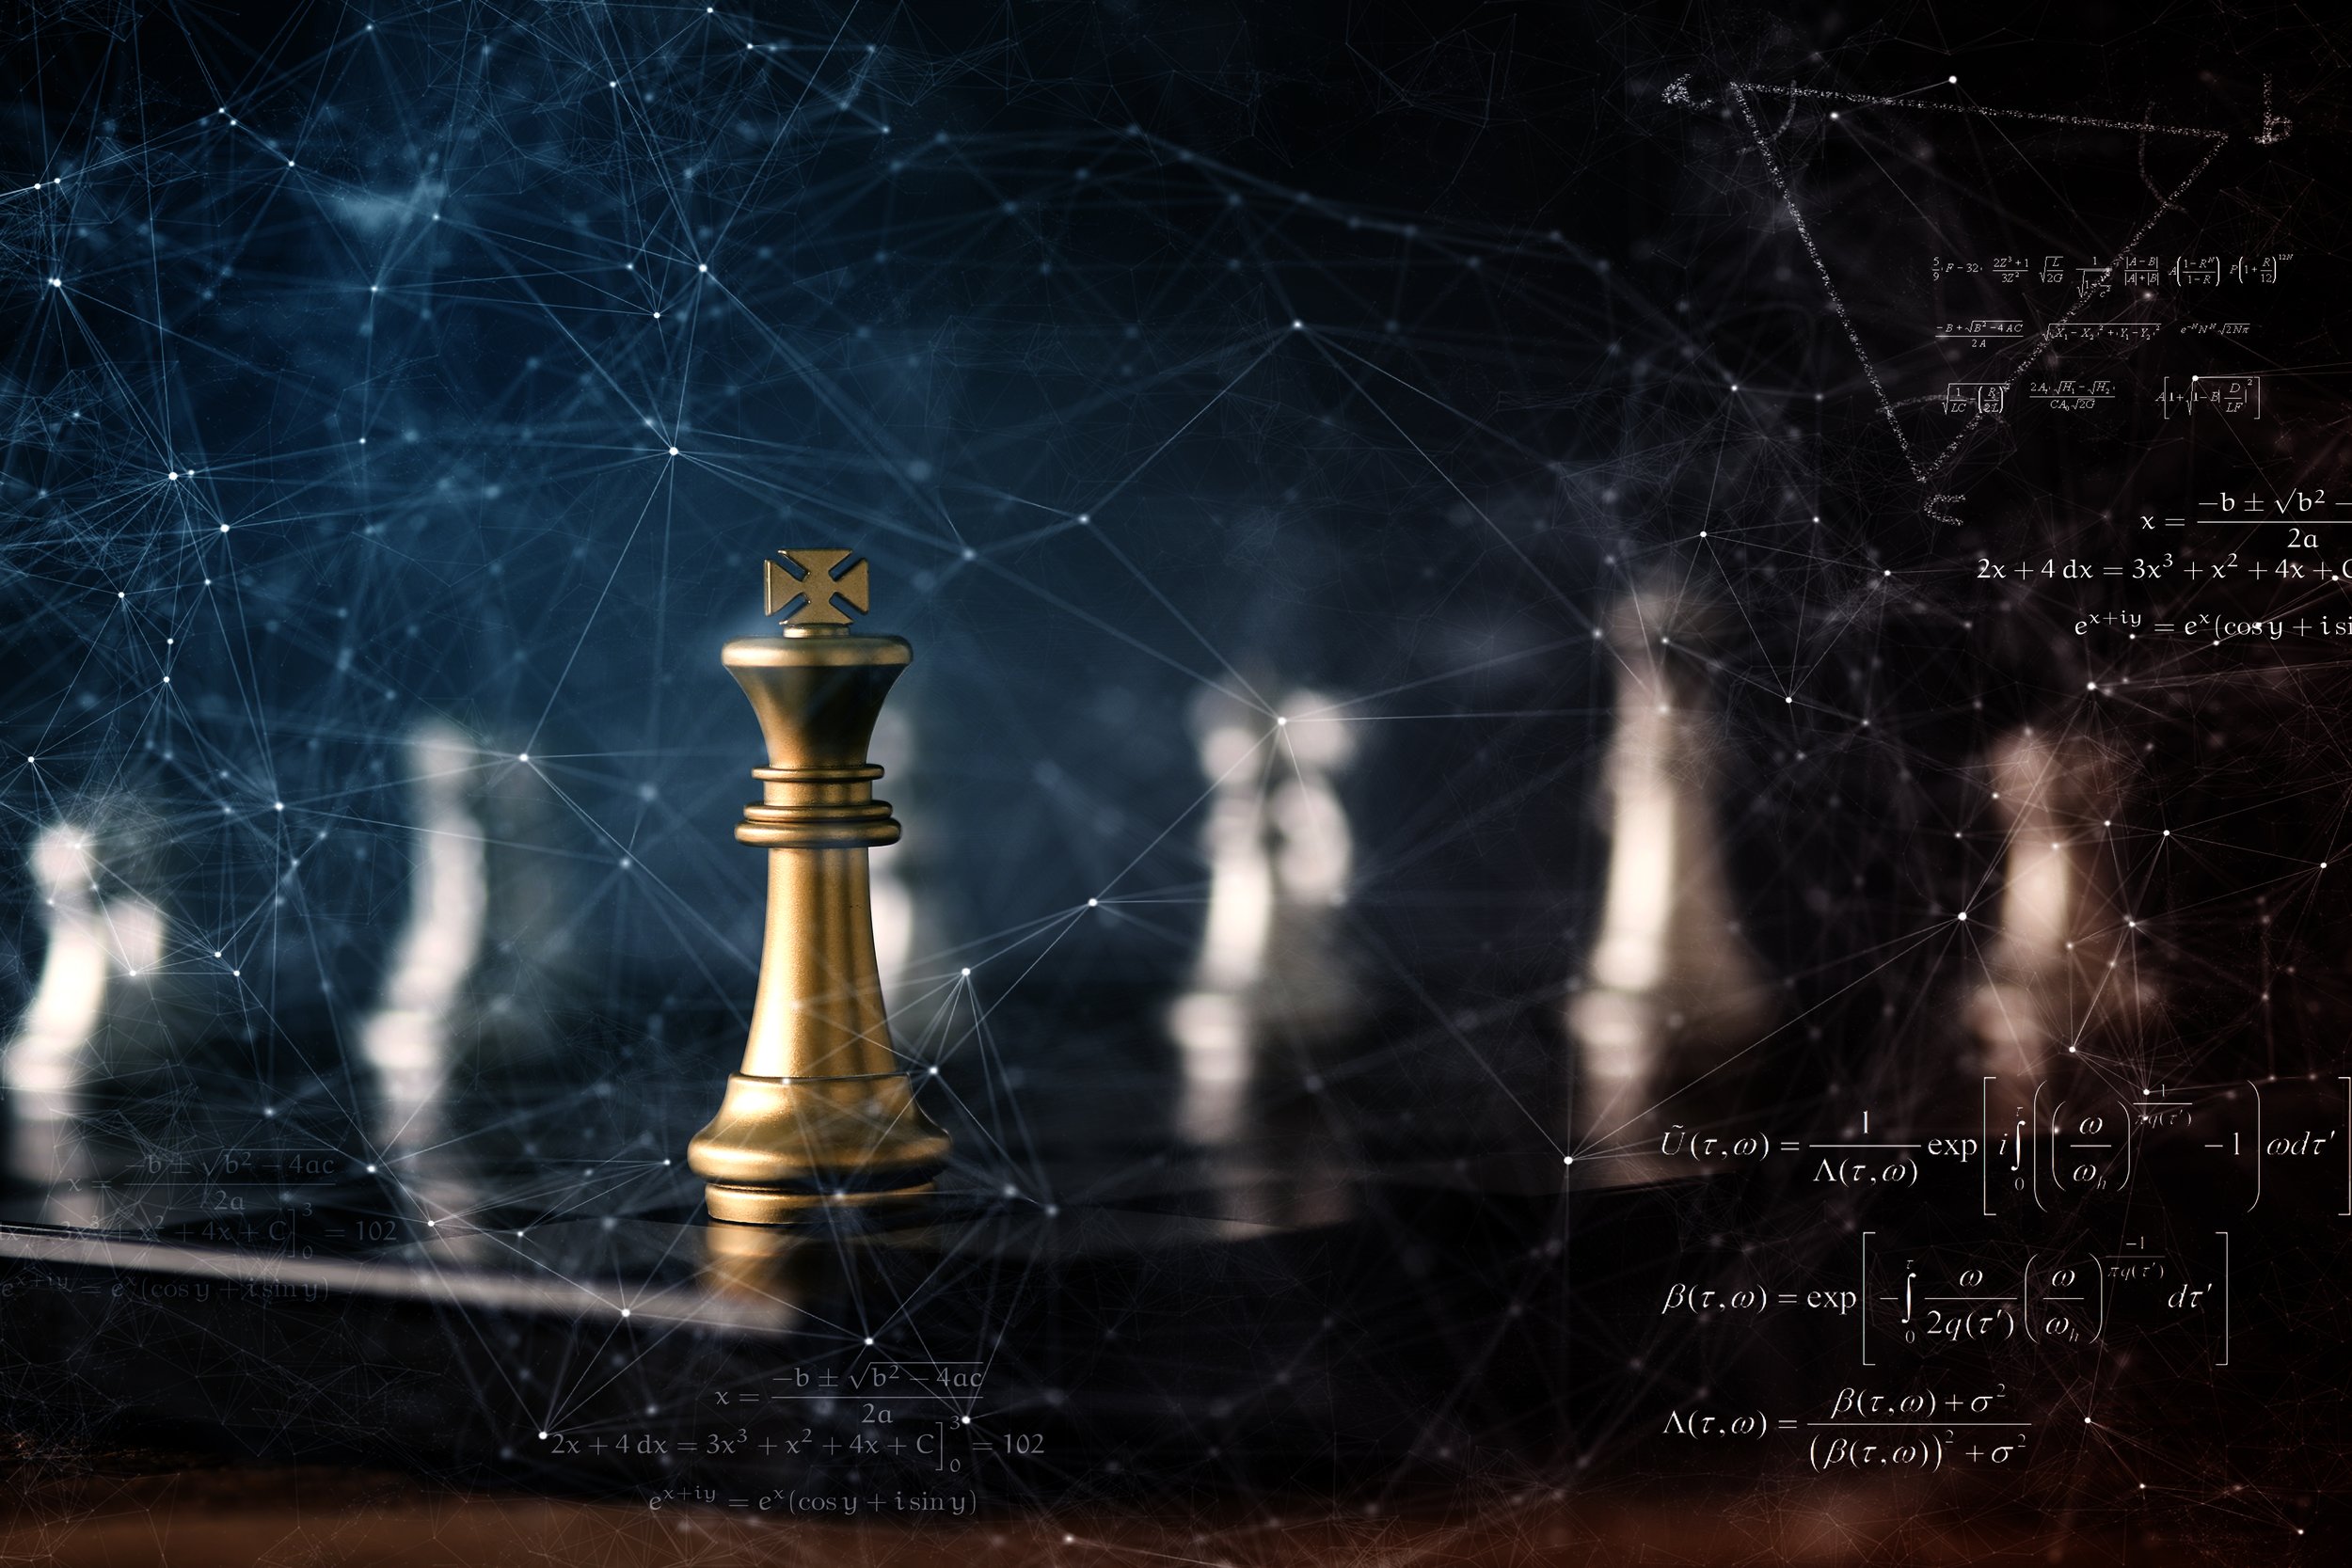 Why theres no arrow analysis in android app? - Chess Forums 